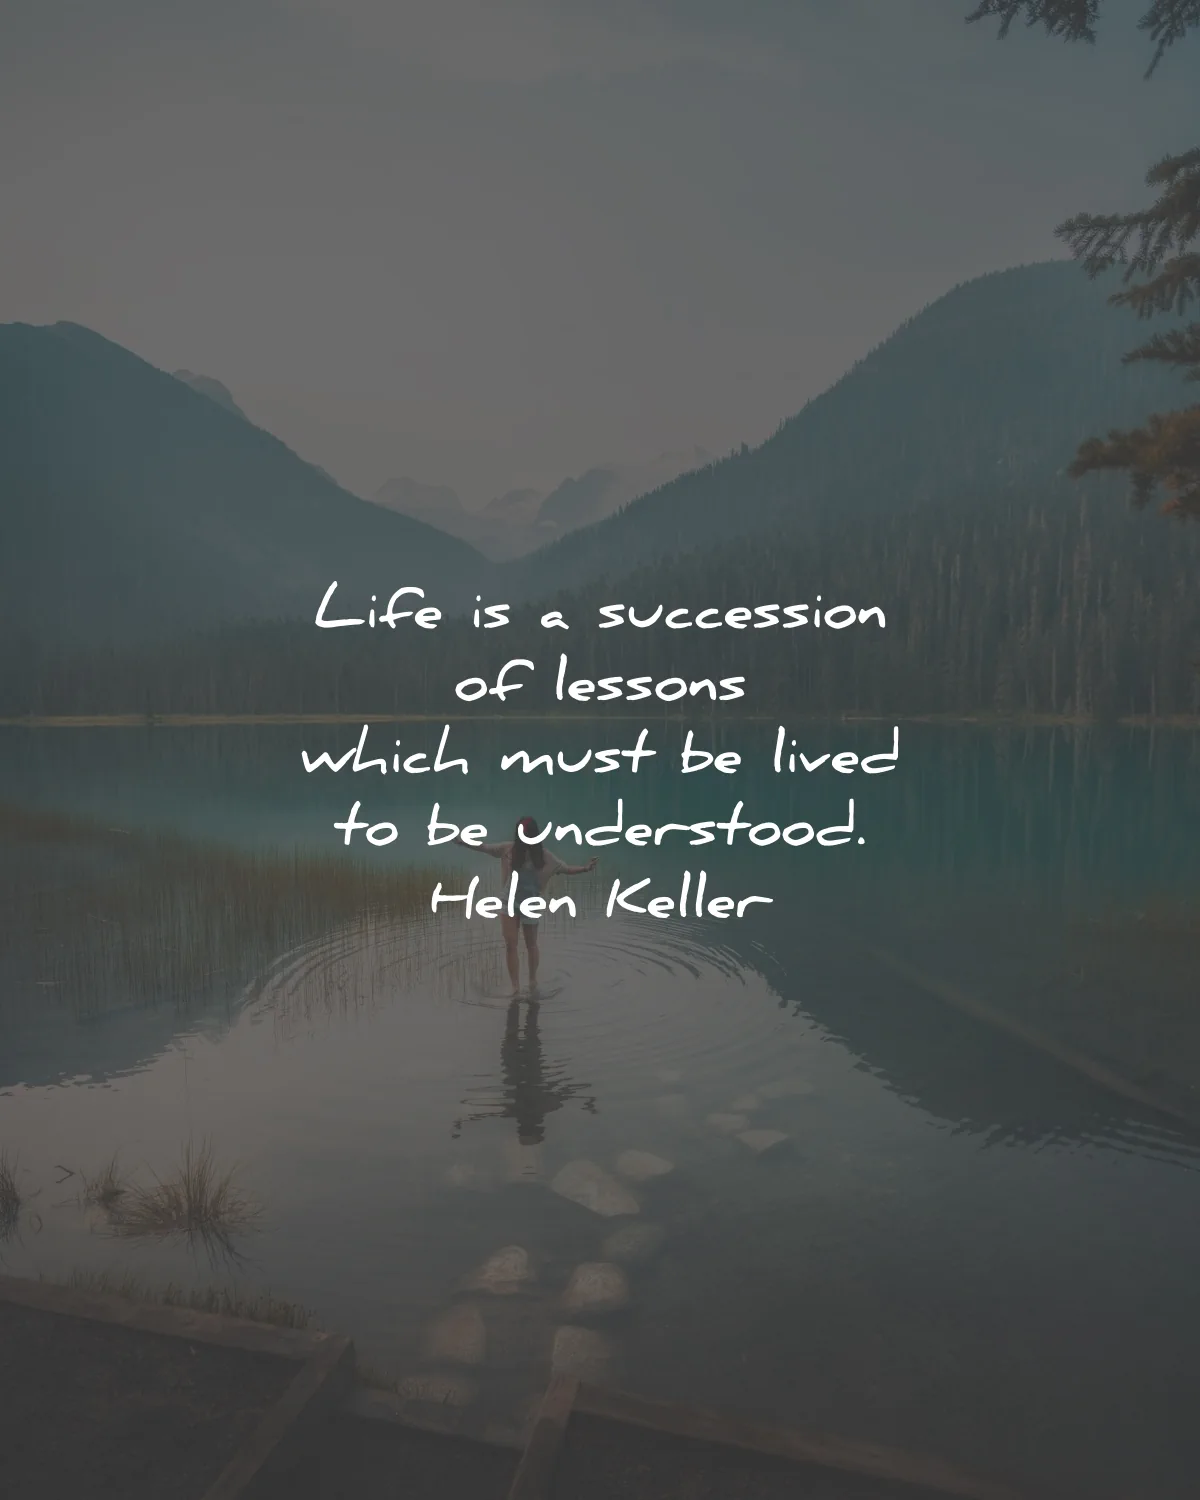 life lessons quotes life succession lessons lived understood helen keller wisdom